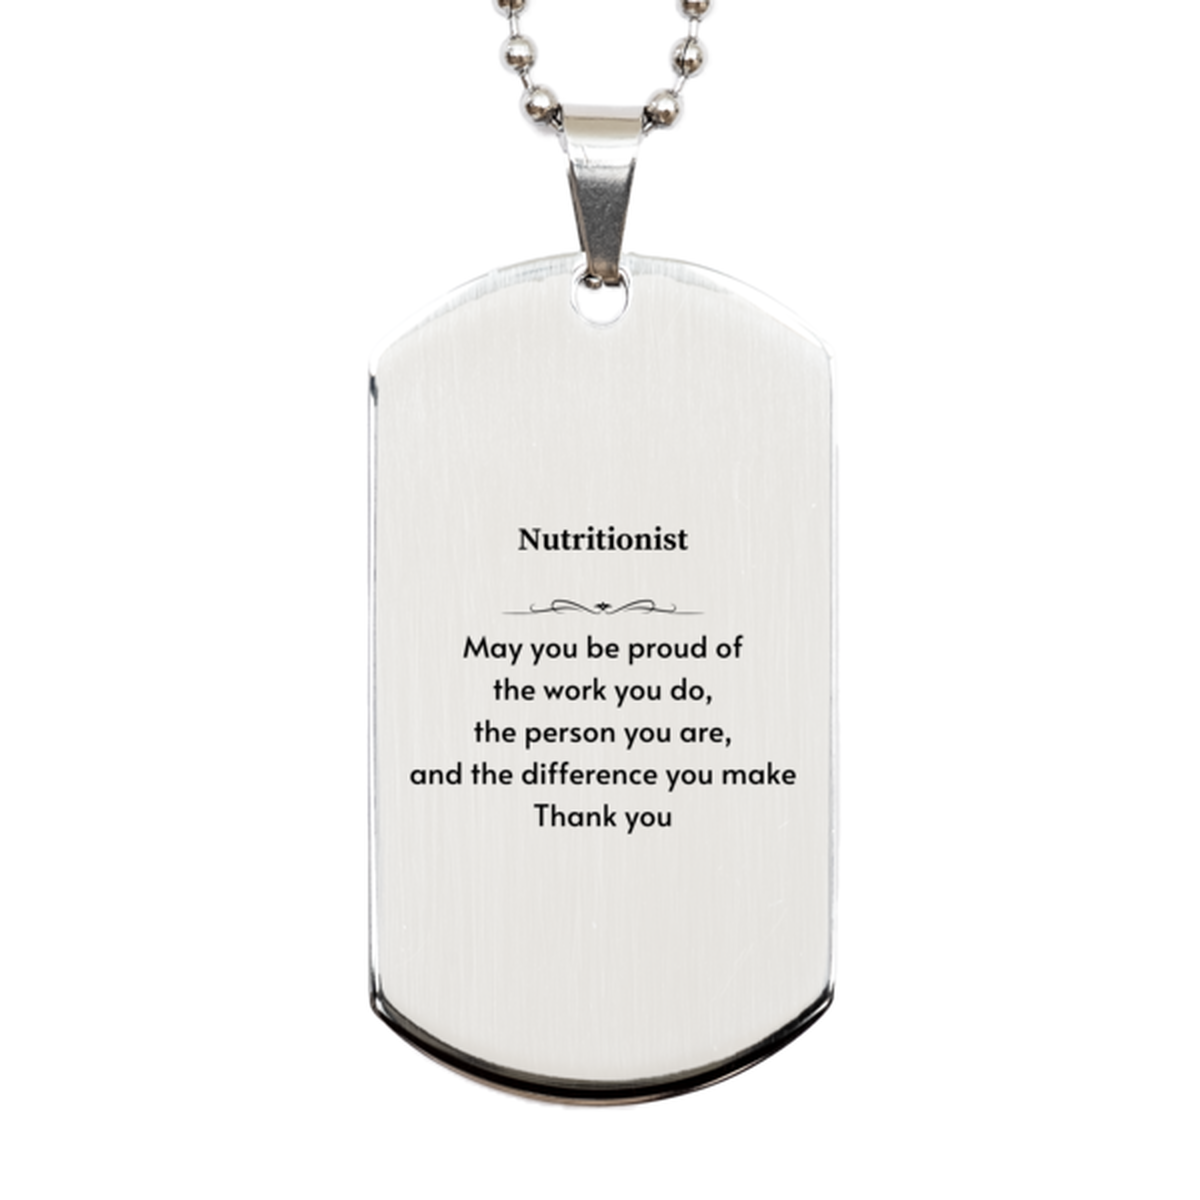 Heartwarming Silver Dog Tag Retirement Coworkers Gifts for Nutritionist, Nutritionist May You be proud of the work you do, the person you are Gifts for Boss Men Women Friends